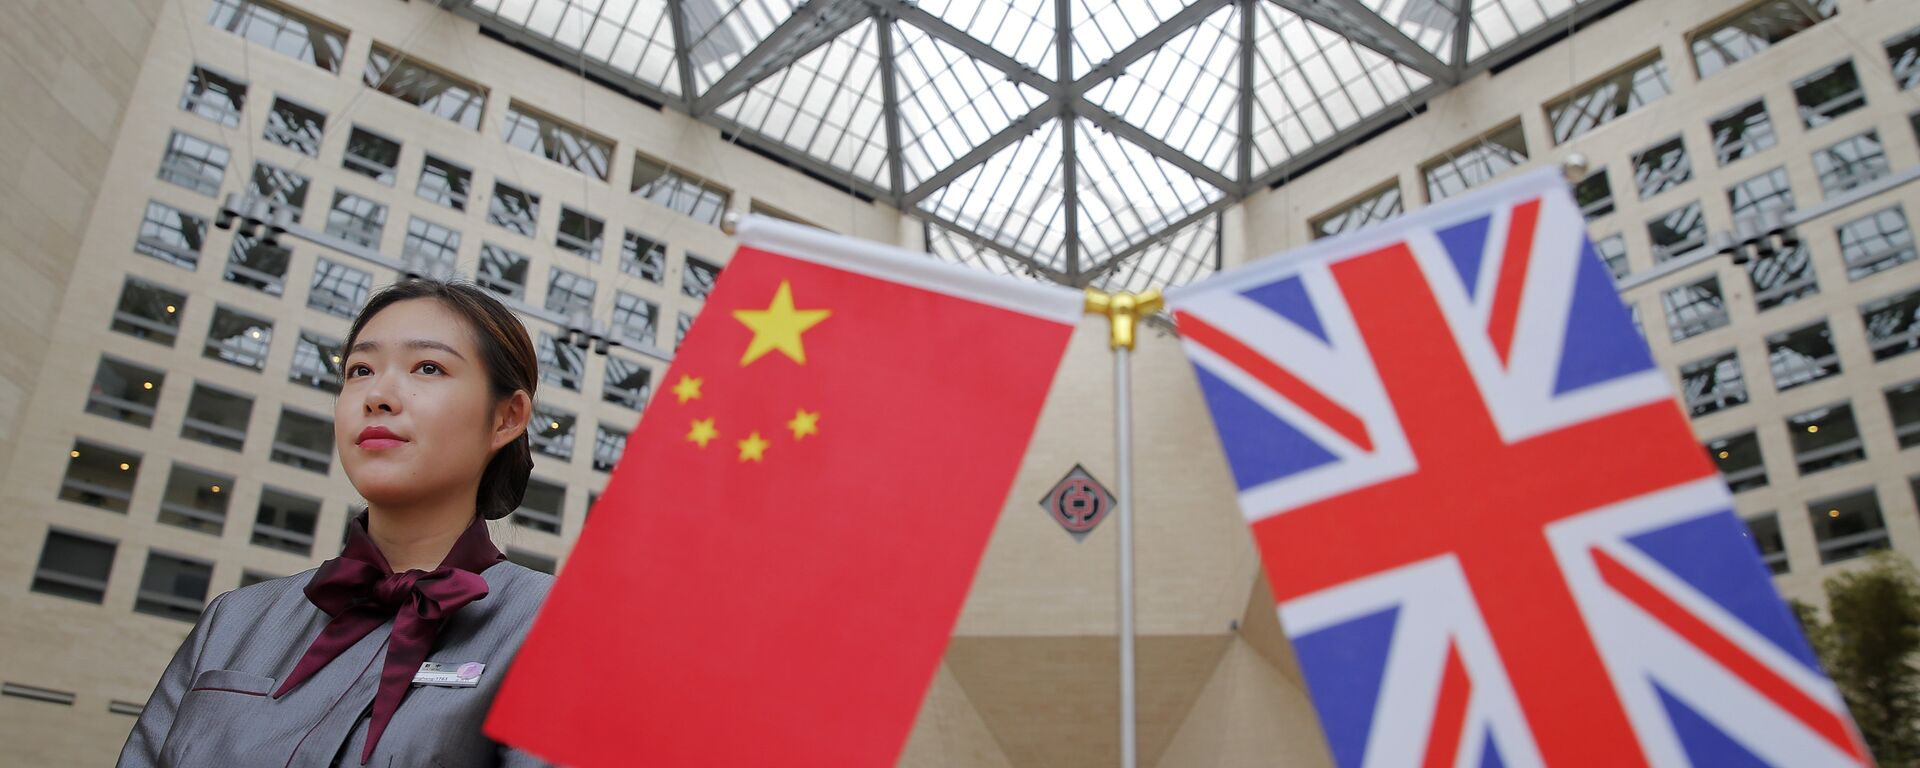 A member of staff stands behind flags as officials arrive for the UK-China High Level Financial Services Roundtable at the Bank of China head office building in Beijing on July 22, 2016 - Sputnik International, 1920, 16.11.2022